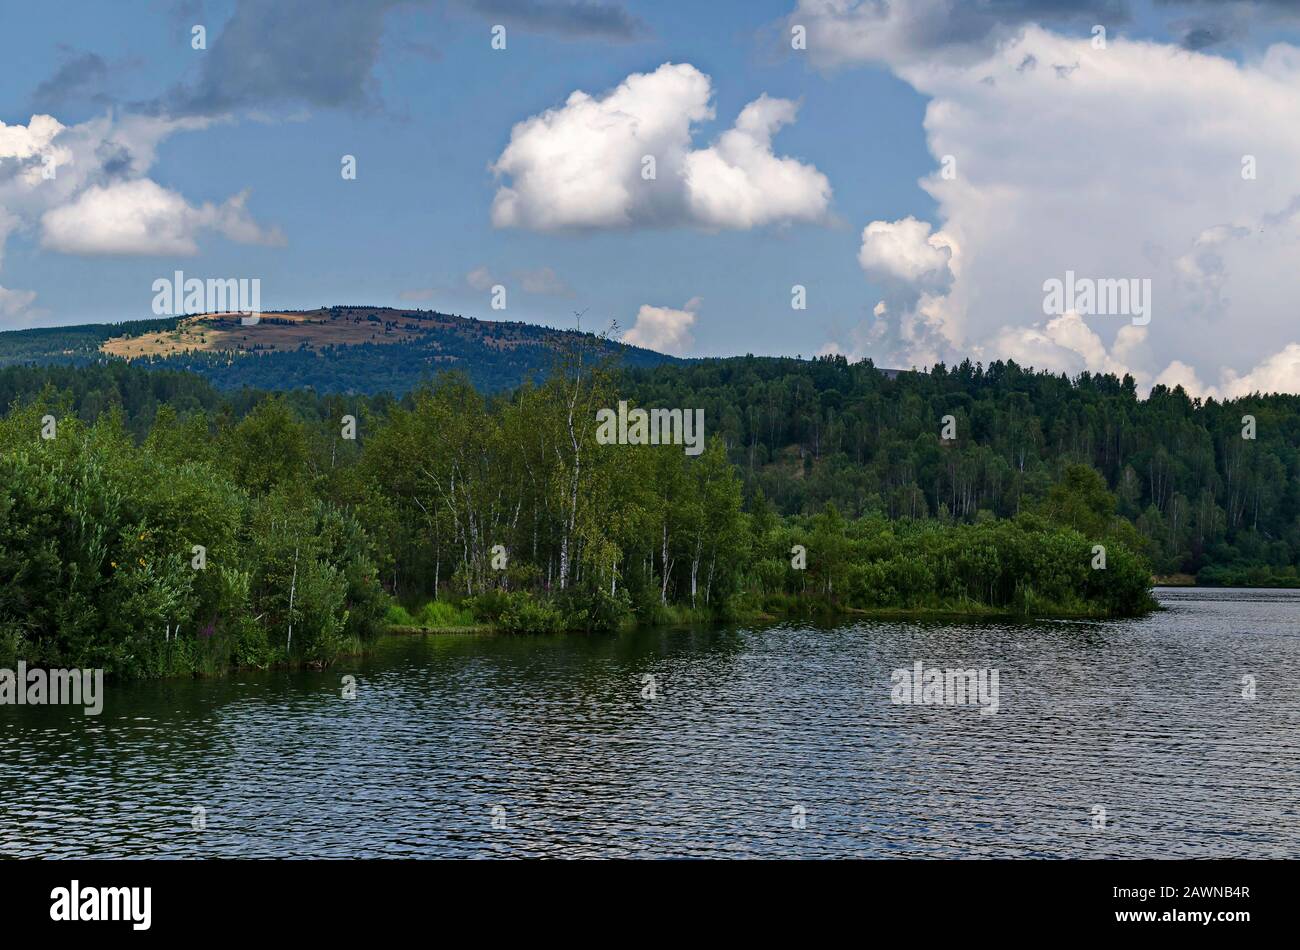 Landscape with floating island, part peat two metre deep with vegetation and animals in Vlasina mountain lake, anchored to the shore by land, Serbia Stock Photo